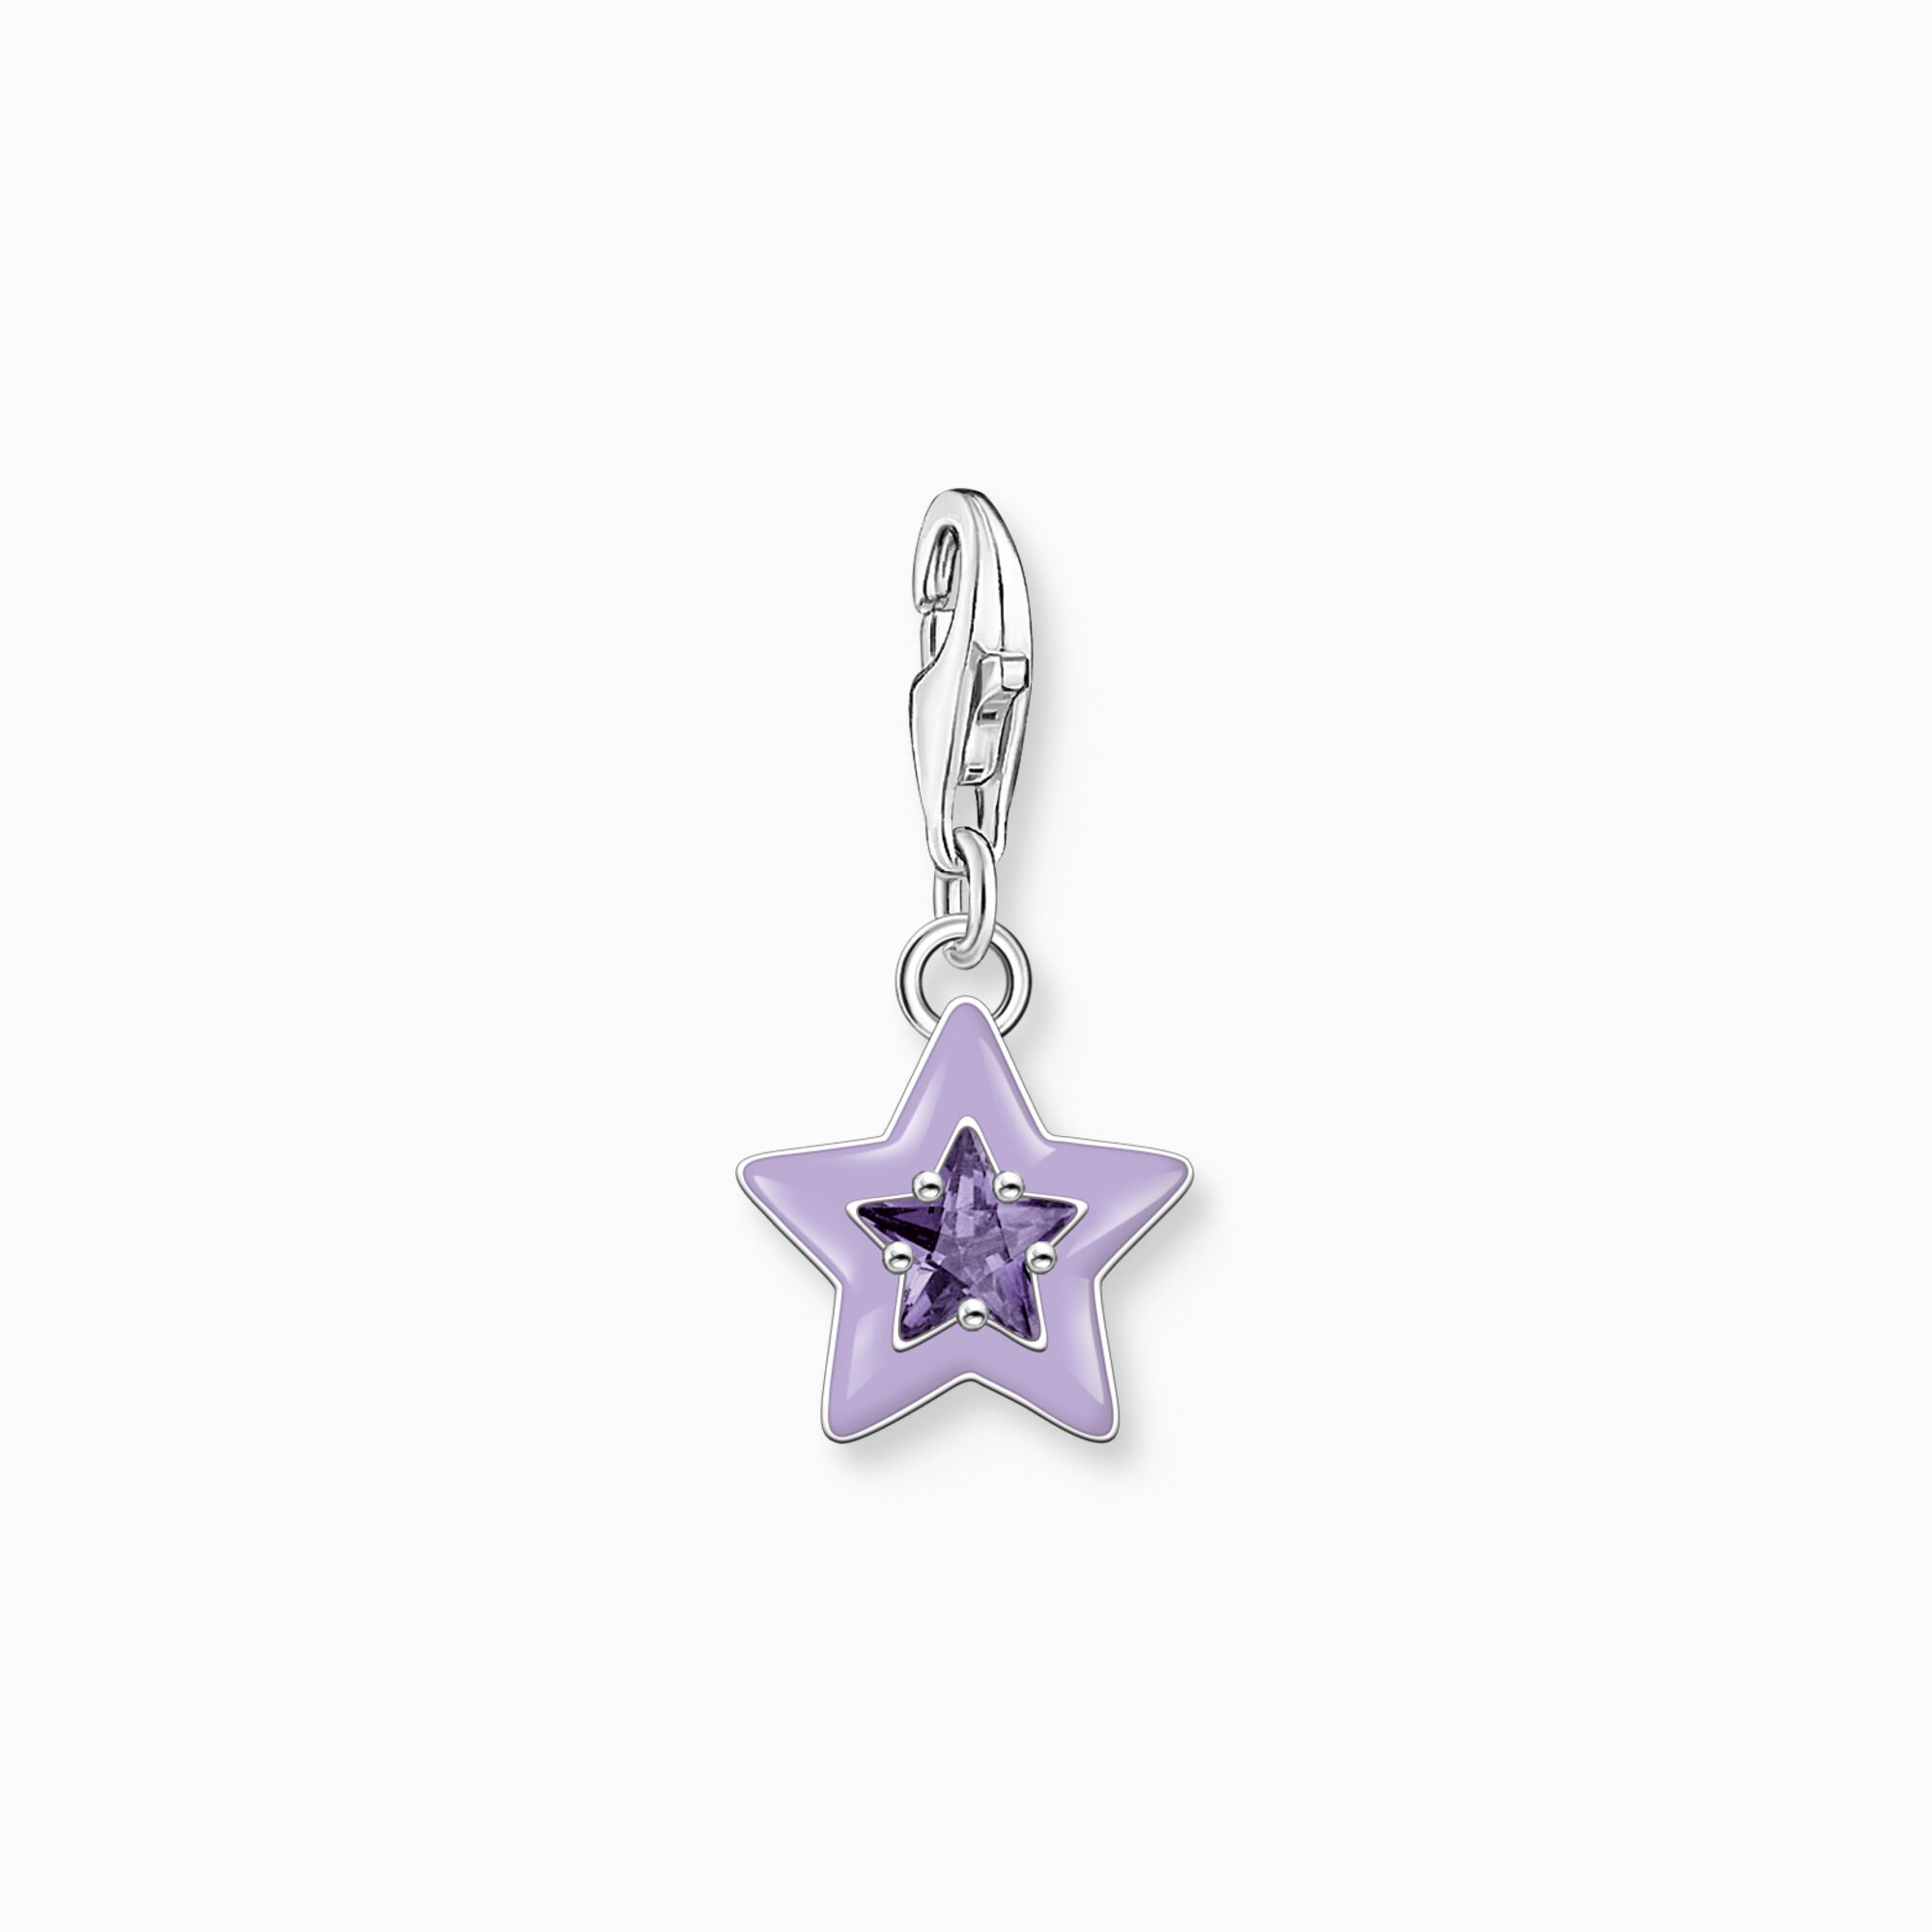 Charm pendant star with amethyst-coloured stones and cold enamel silver from the Charm Club collection in the THOMAS SABO online store